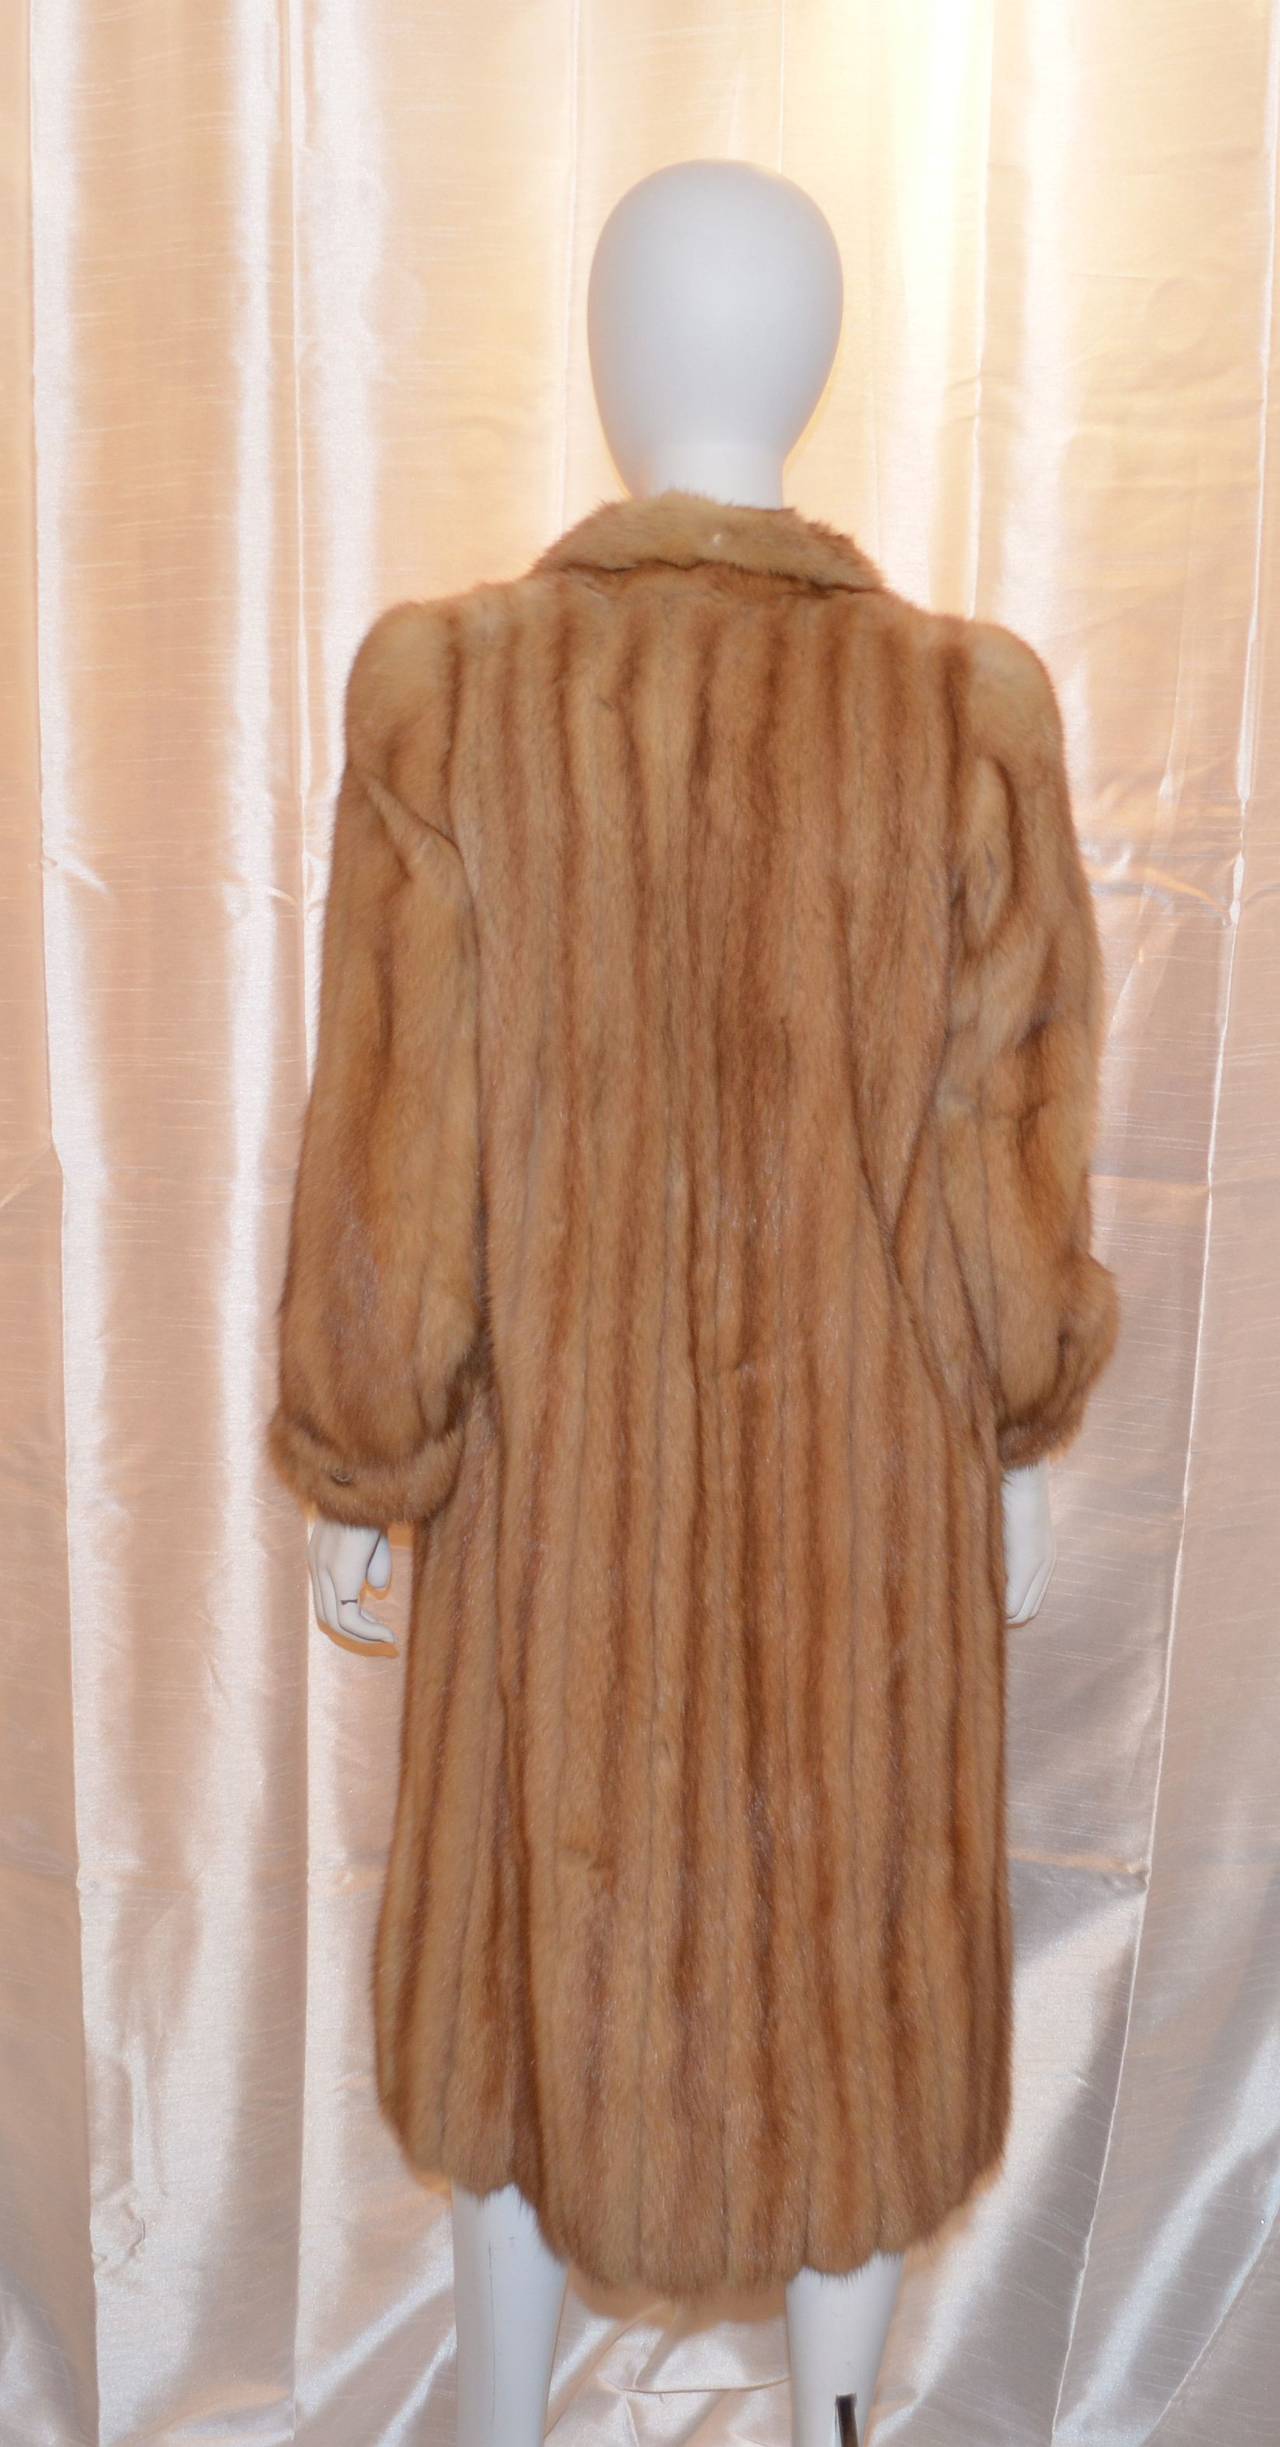 Canadian Sable fur coat is light weight and has been previously stored by a furrier,  hook-and-eye closures along the front center, and a button and loop closure at the cuffs. Fully lined. Soft supple fur with no hard spots, repairs or tears to the